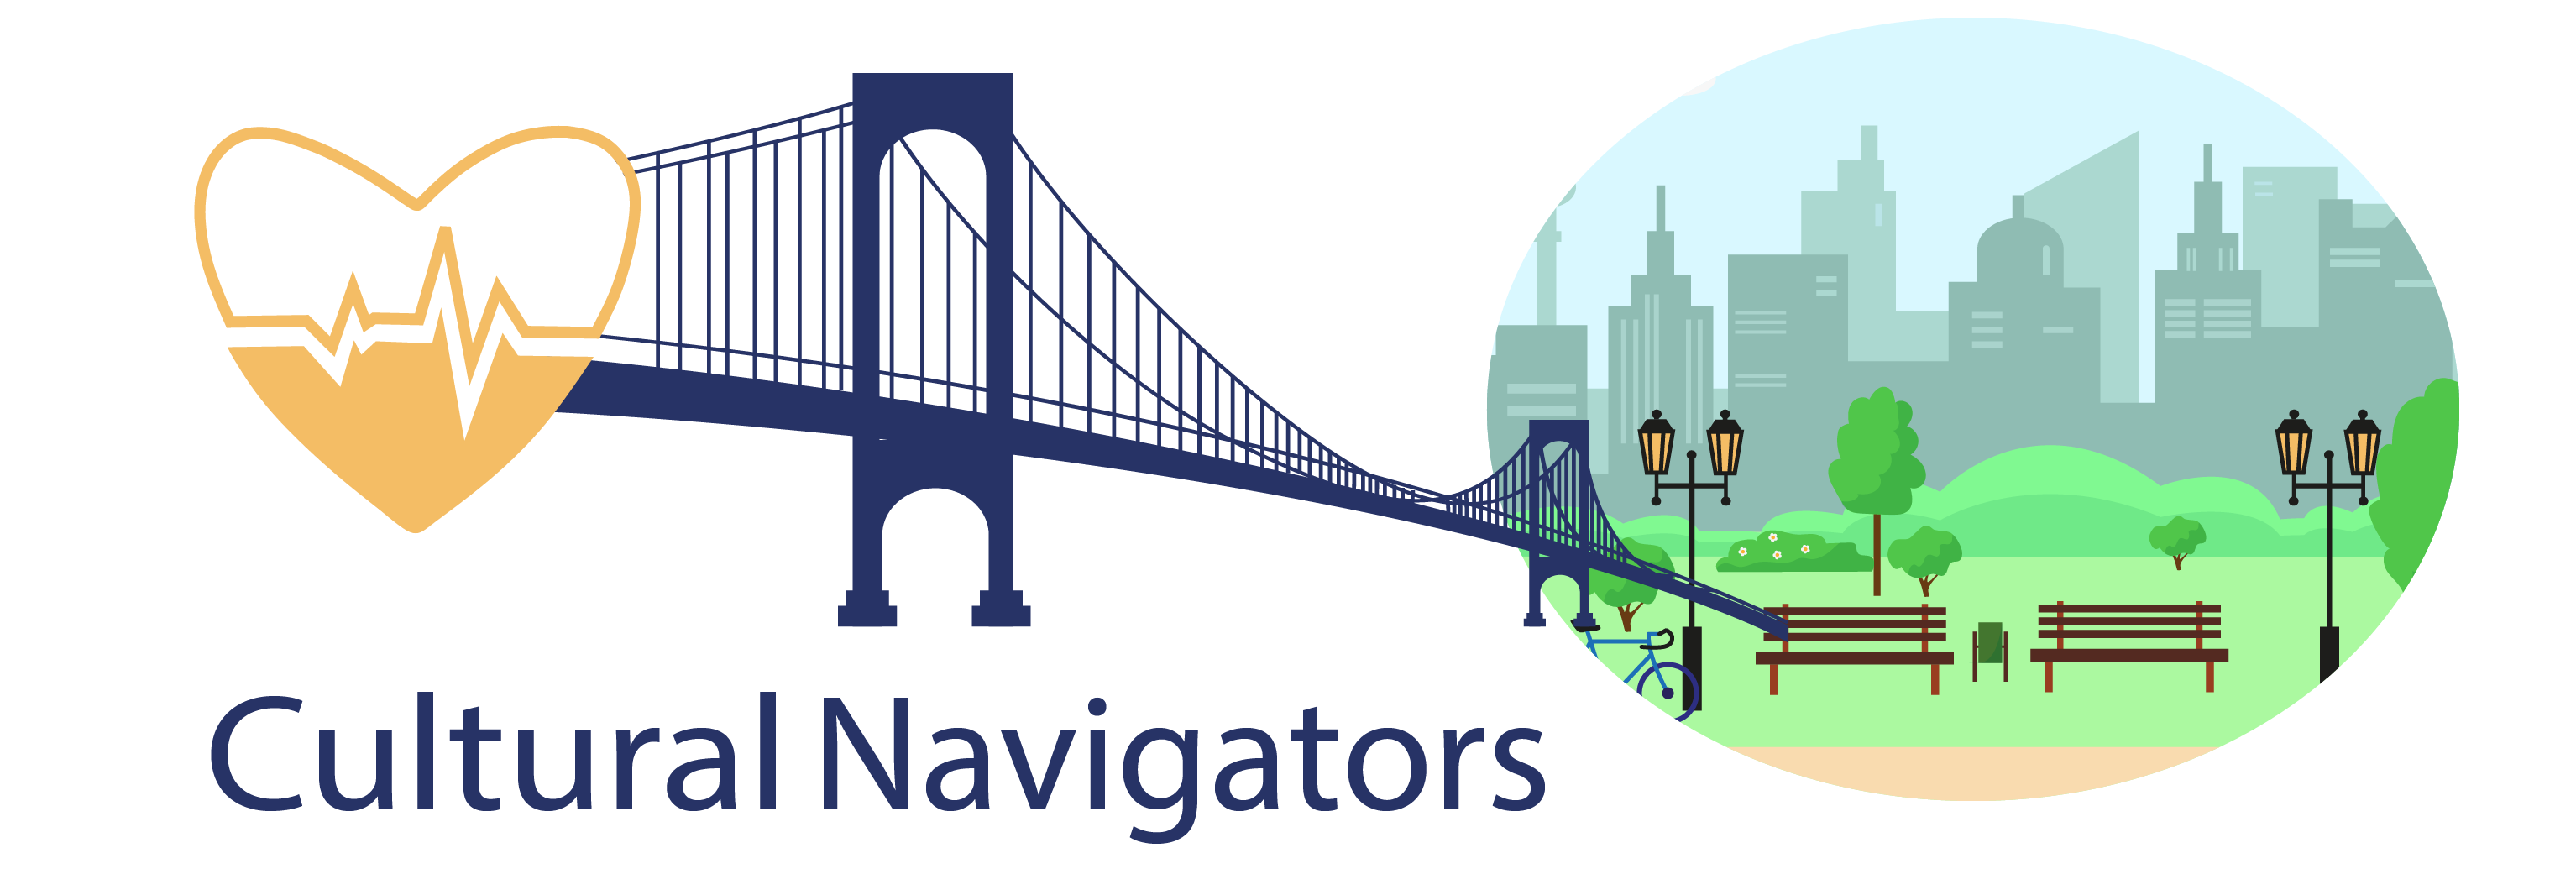 Course image showing a bridge representing a cultural navigator between the healthcare world and the community